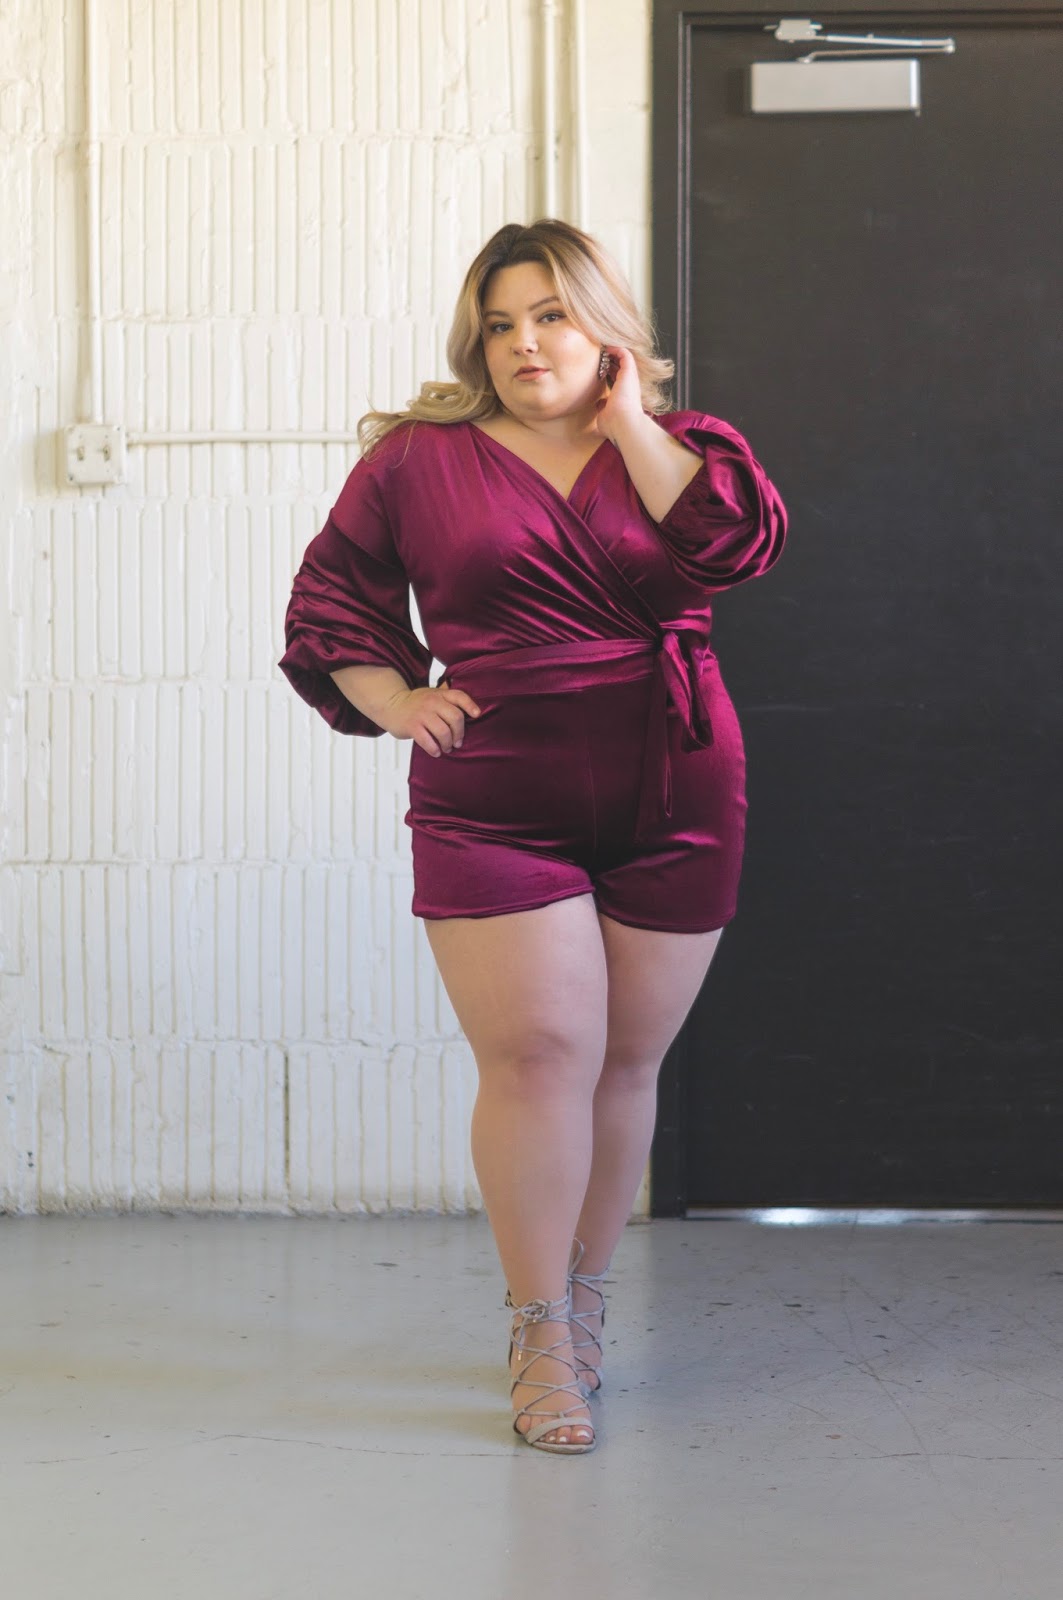 natalie in the city, natalie craig, plus size fashion blogger, Chicago fashion blogger, plus size fashion, affordable plus size clothing, embrace your curves, off your beauty standards. body positive, curves and confidence, fashion nova, fashion nova curve, velvet romper